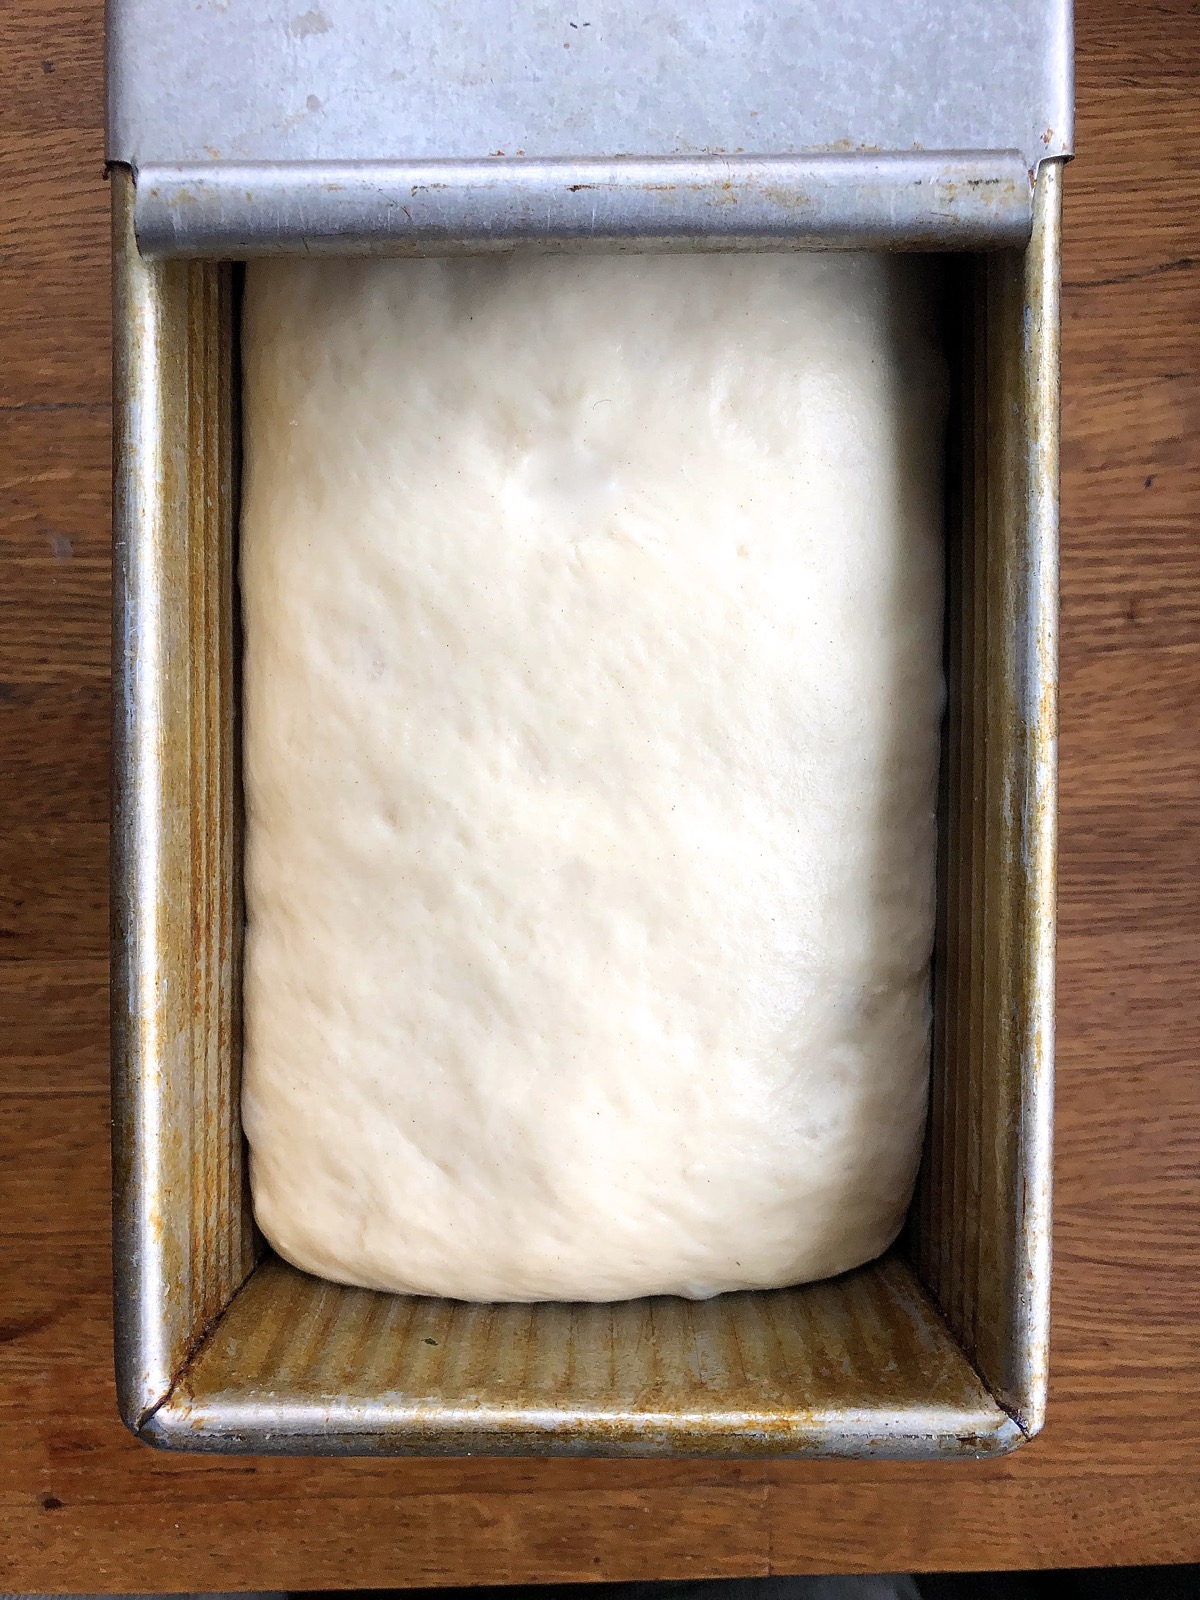 Rising bread dough in a loaf pan, ready to bake.